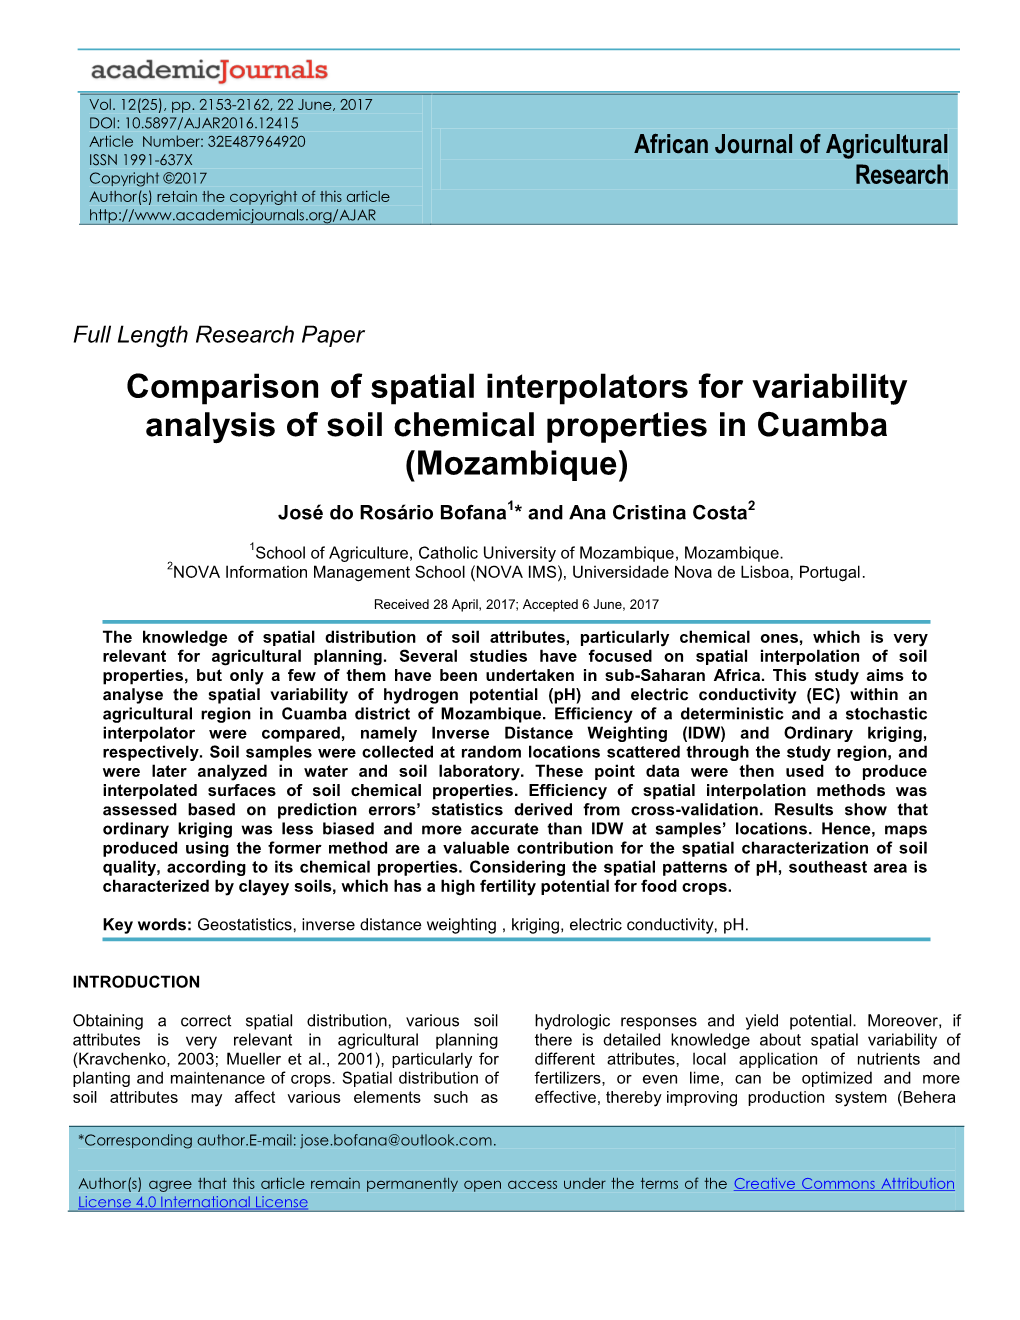 Comparison of Spatial Interpolators for Variability Analysis of Soil Chemical Properties in Cuamba (Mozambique)